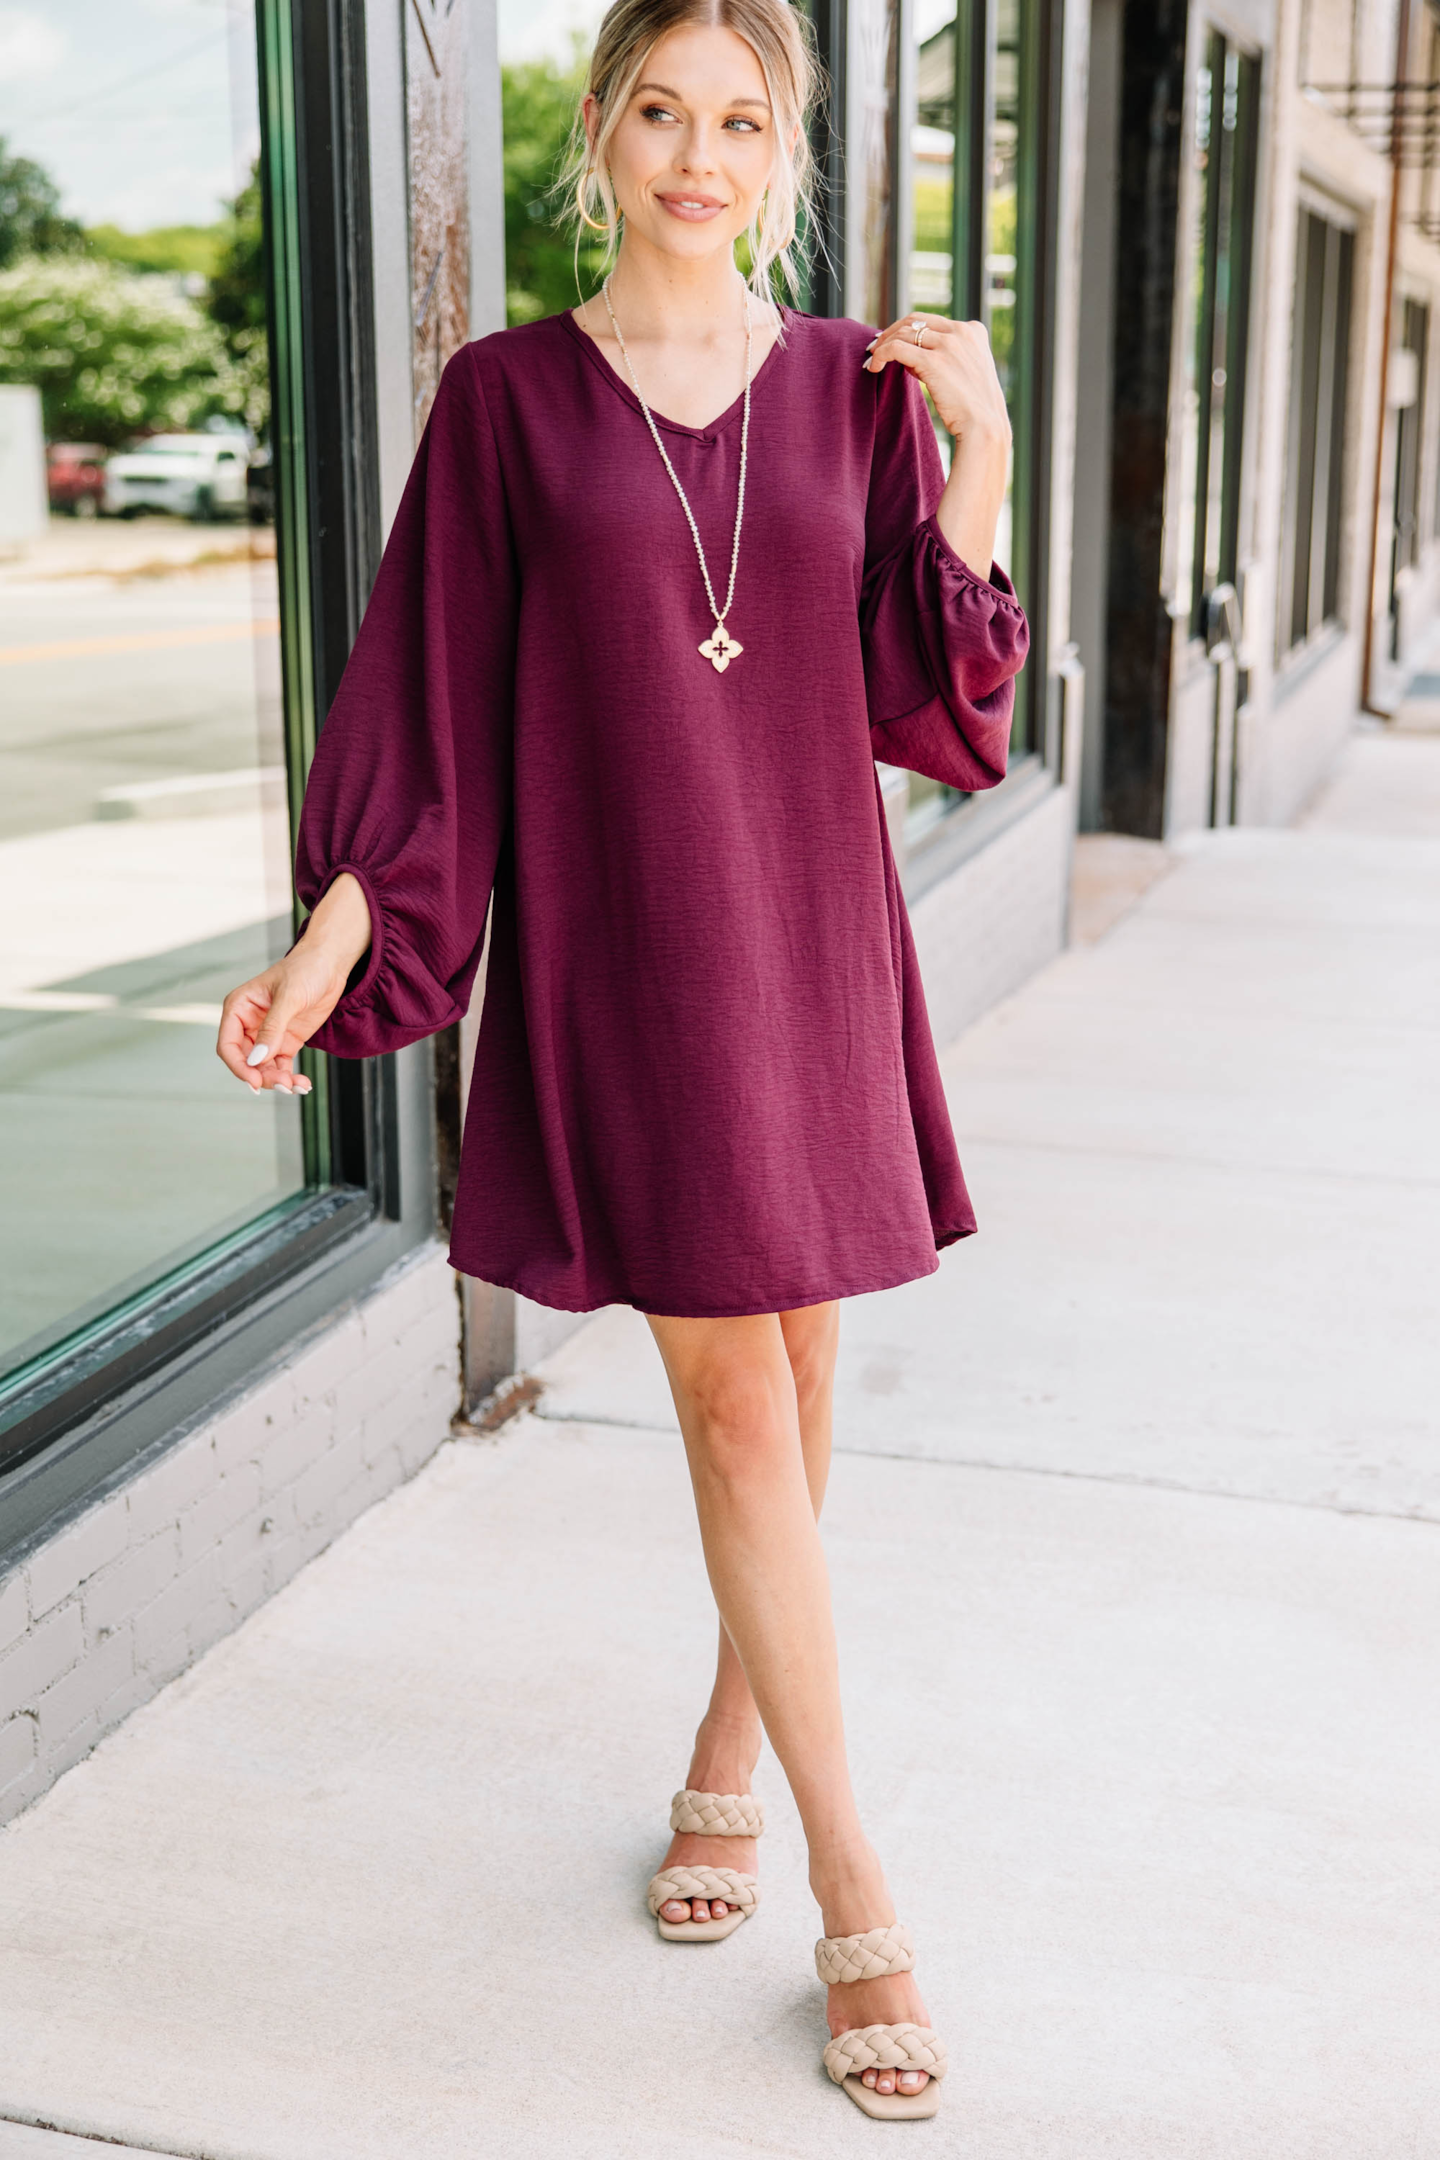 https://shopthemint.com/products/loud-and-clear-eggplant-purple-bubble-sleeve-dress?variant=39654332530746